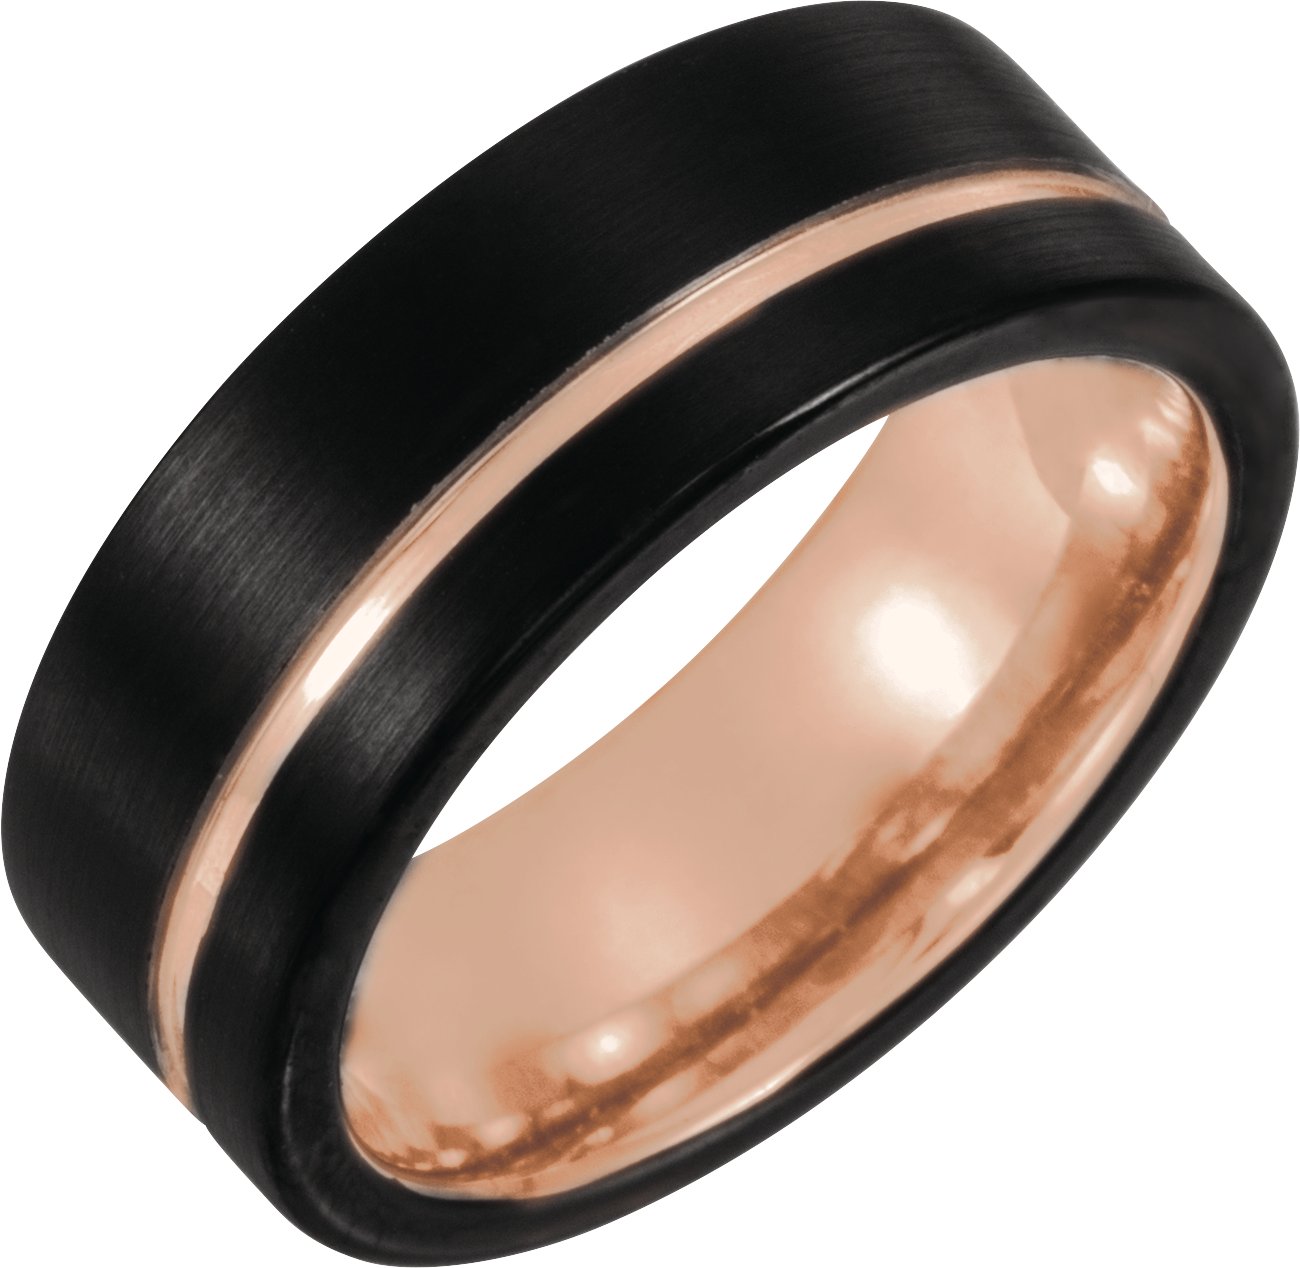 Black & 18K Rose Gold PVD Tungsten 8 mm Band Size 10